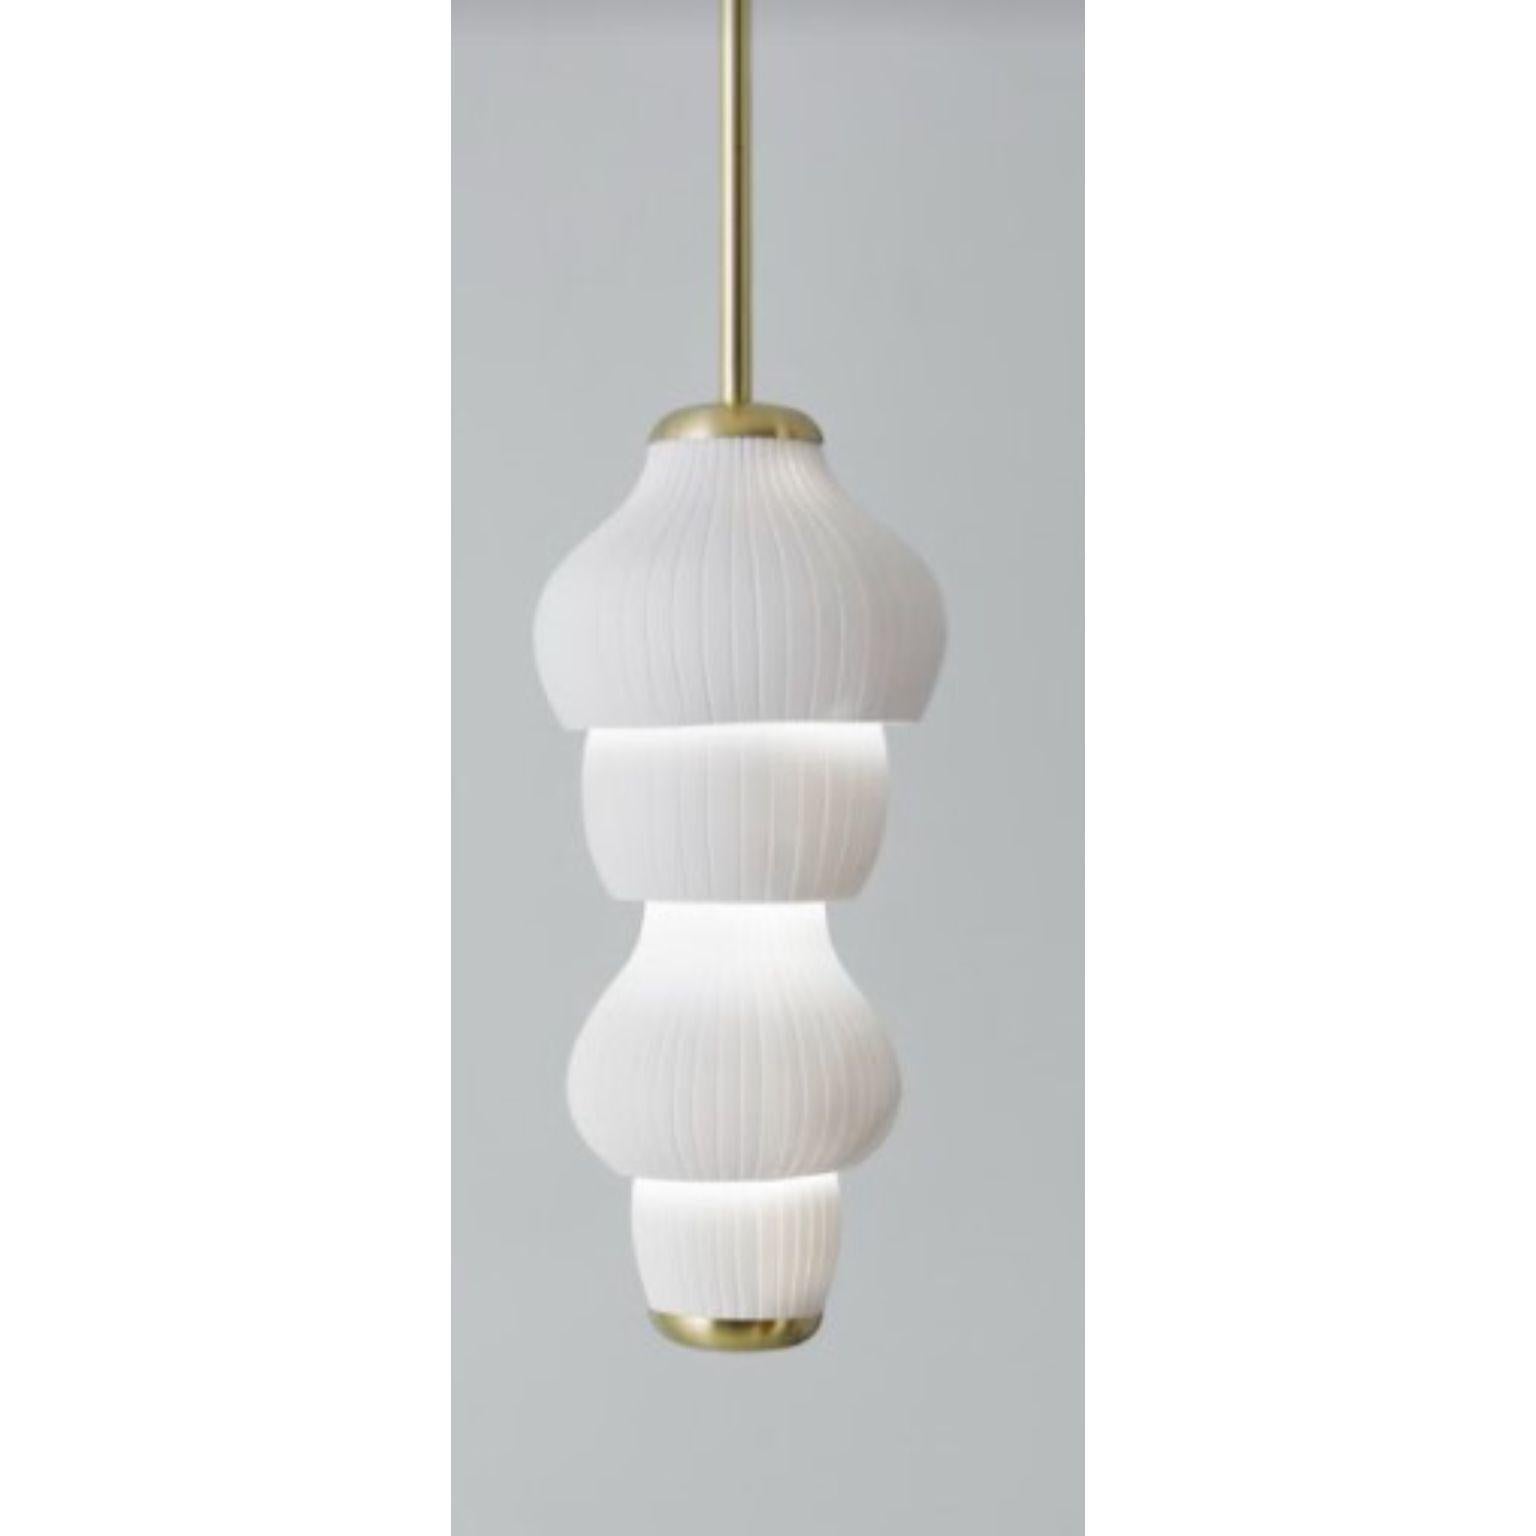 Glaïeul medium pendant light by Mydriaz
Dimensions: D 26 x H 100 cm 
Materials: Brushed brass, pale gold finish, biscuit ceramic.
Adjustable measure.

All our lamps can be wired according to each country. If sold to the USA it will be wired for